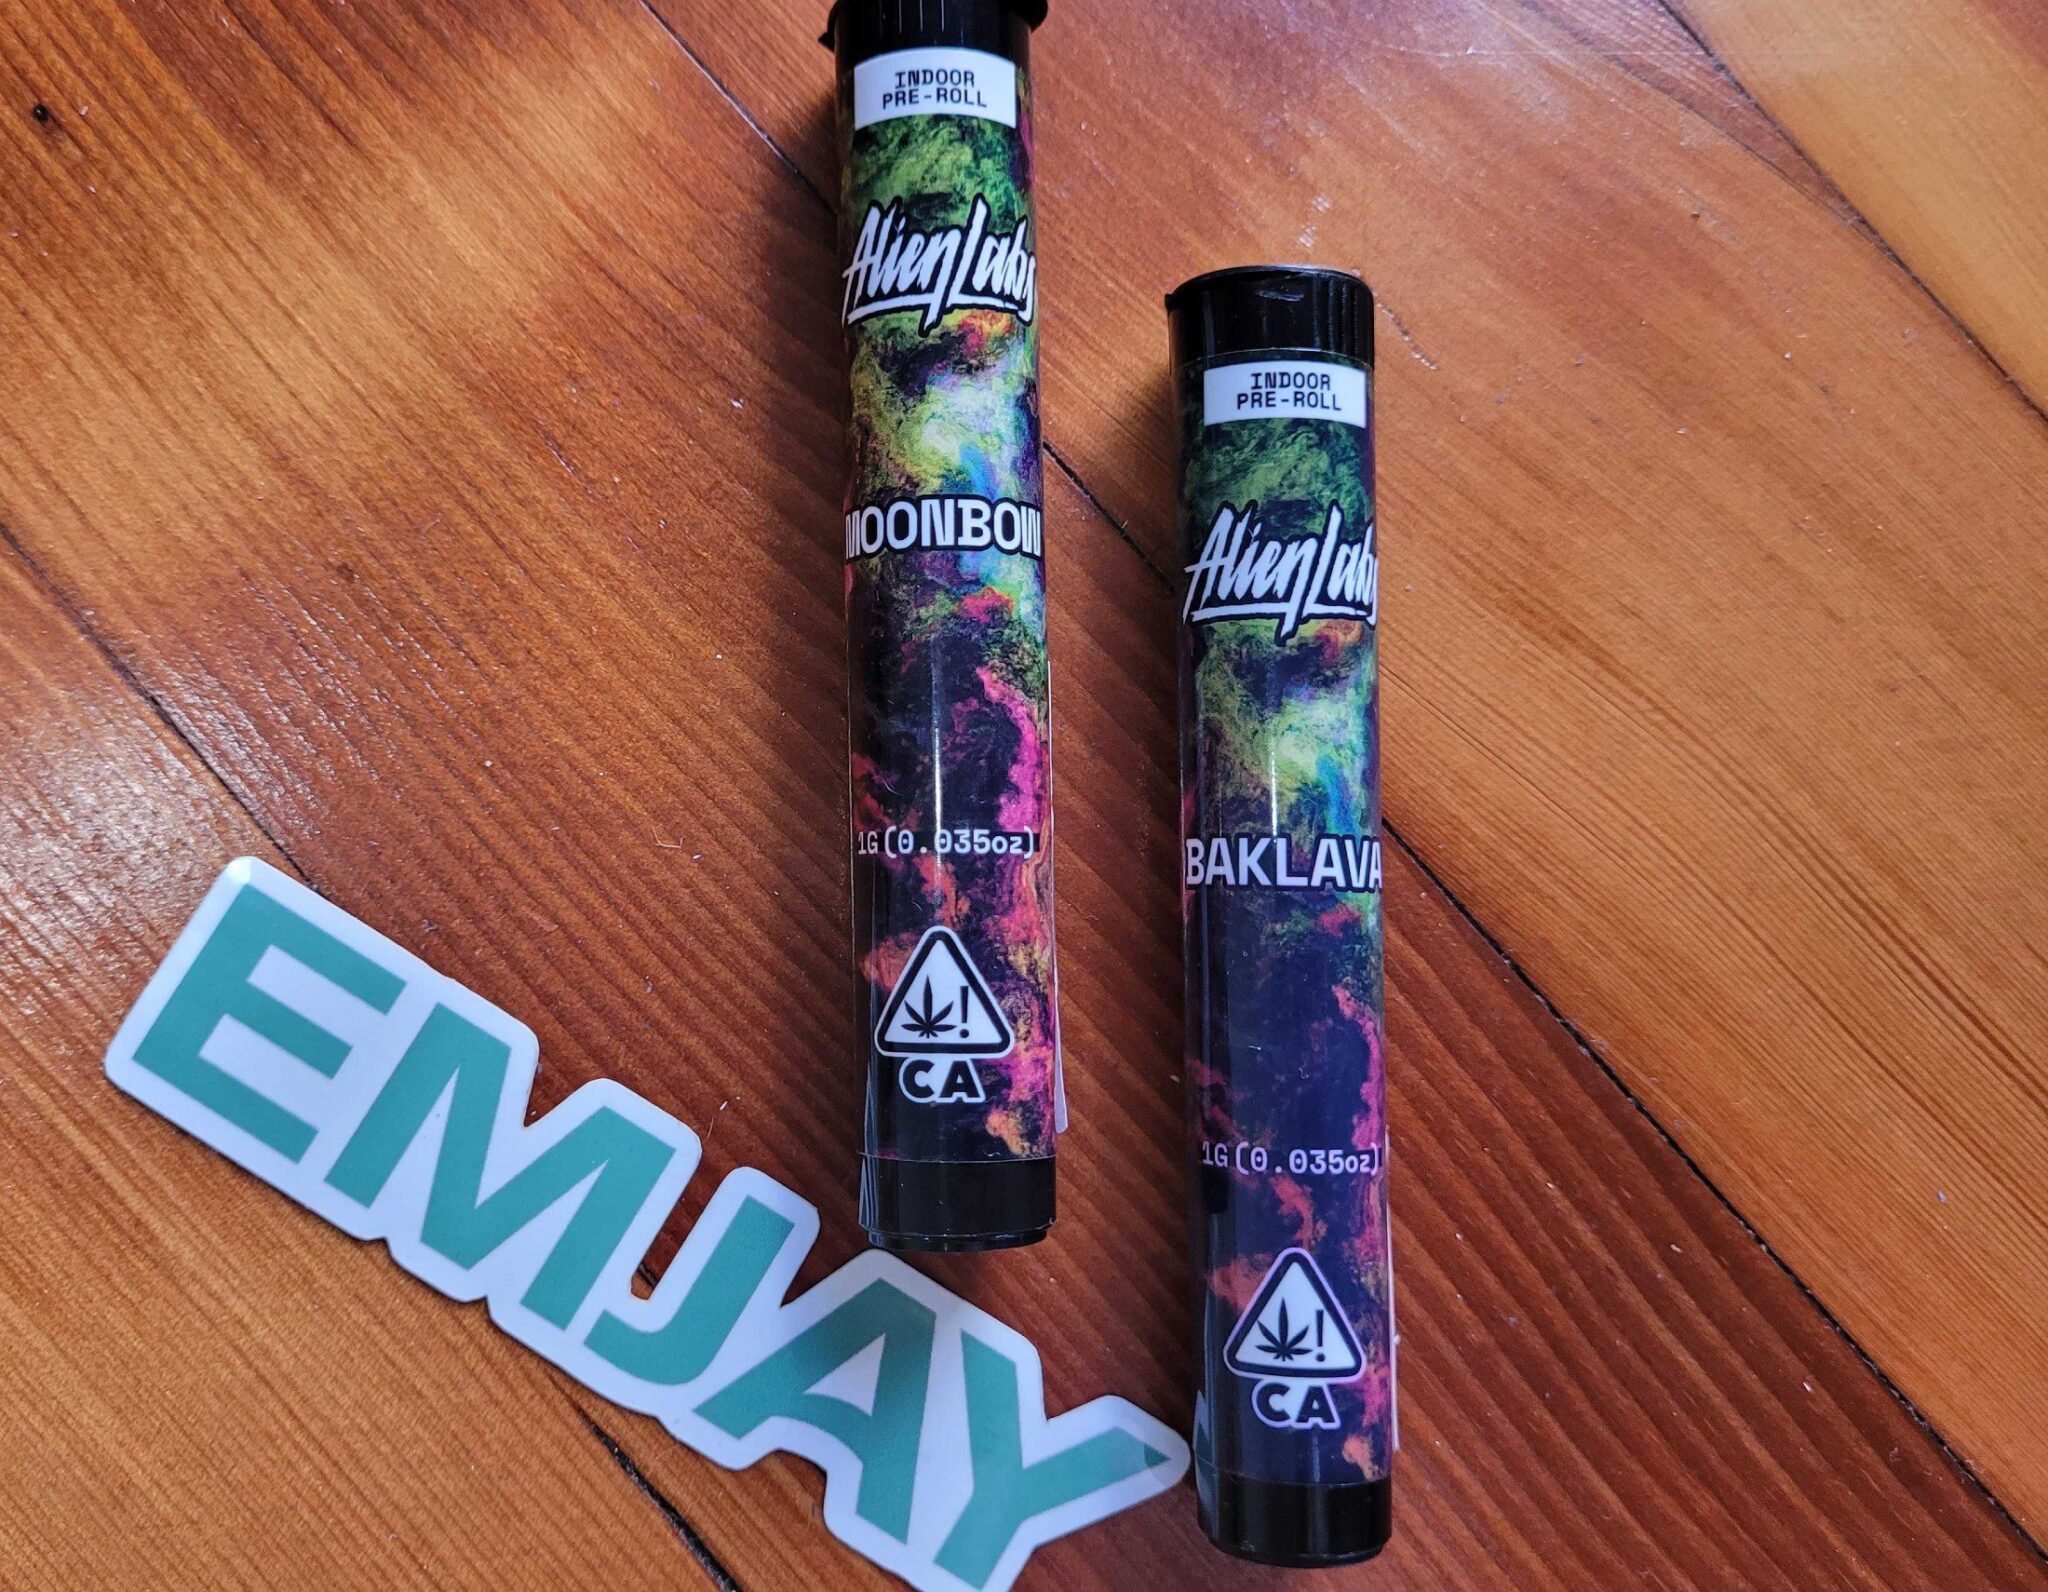 Alien Labs Baklava and Moonbow Preroll_ Emjay review